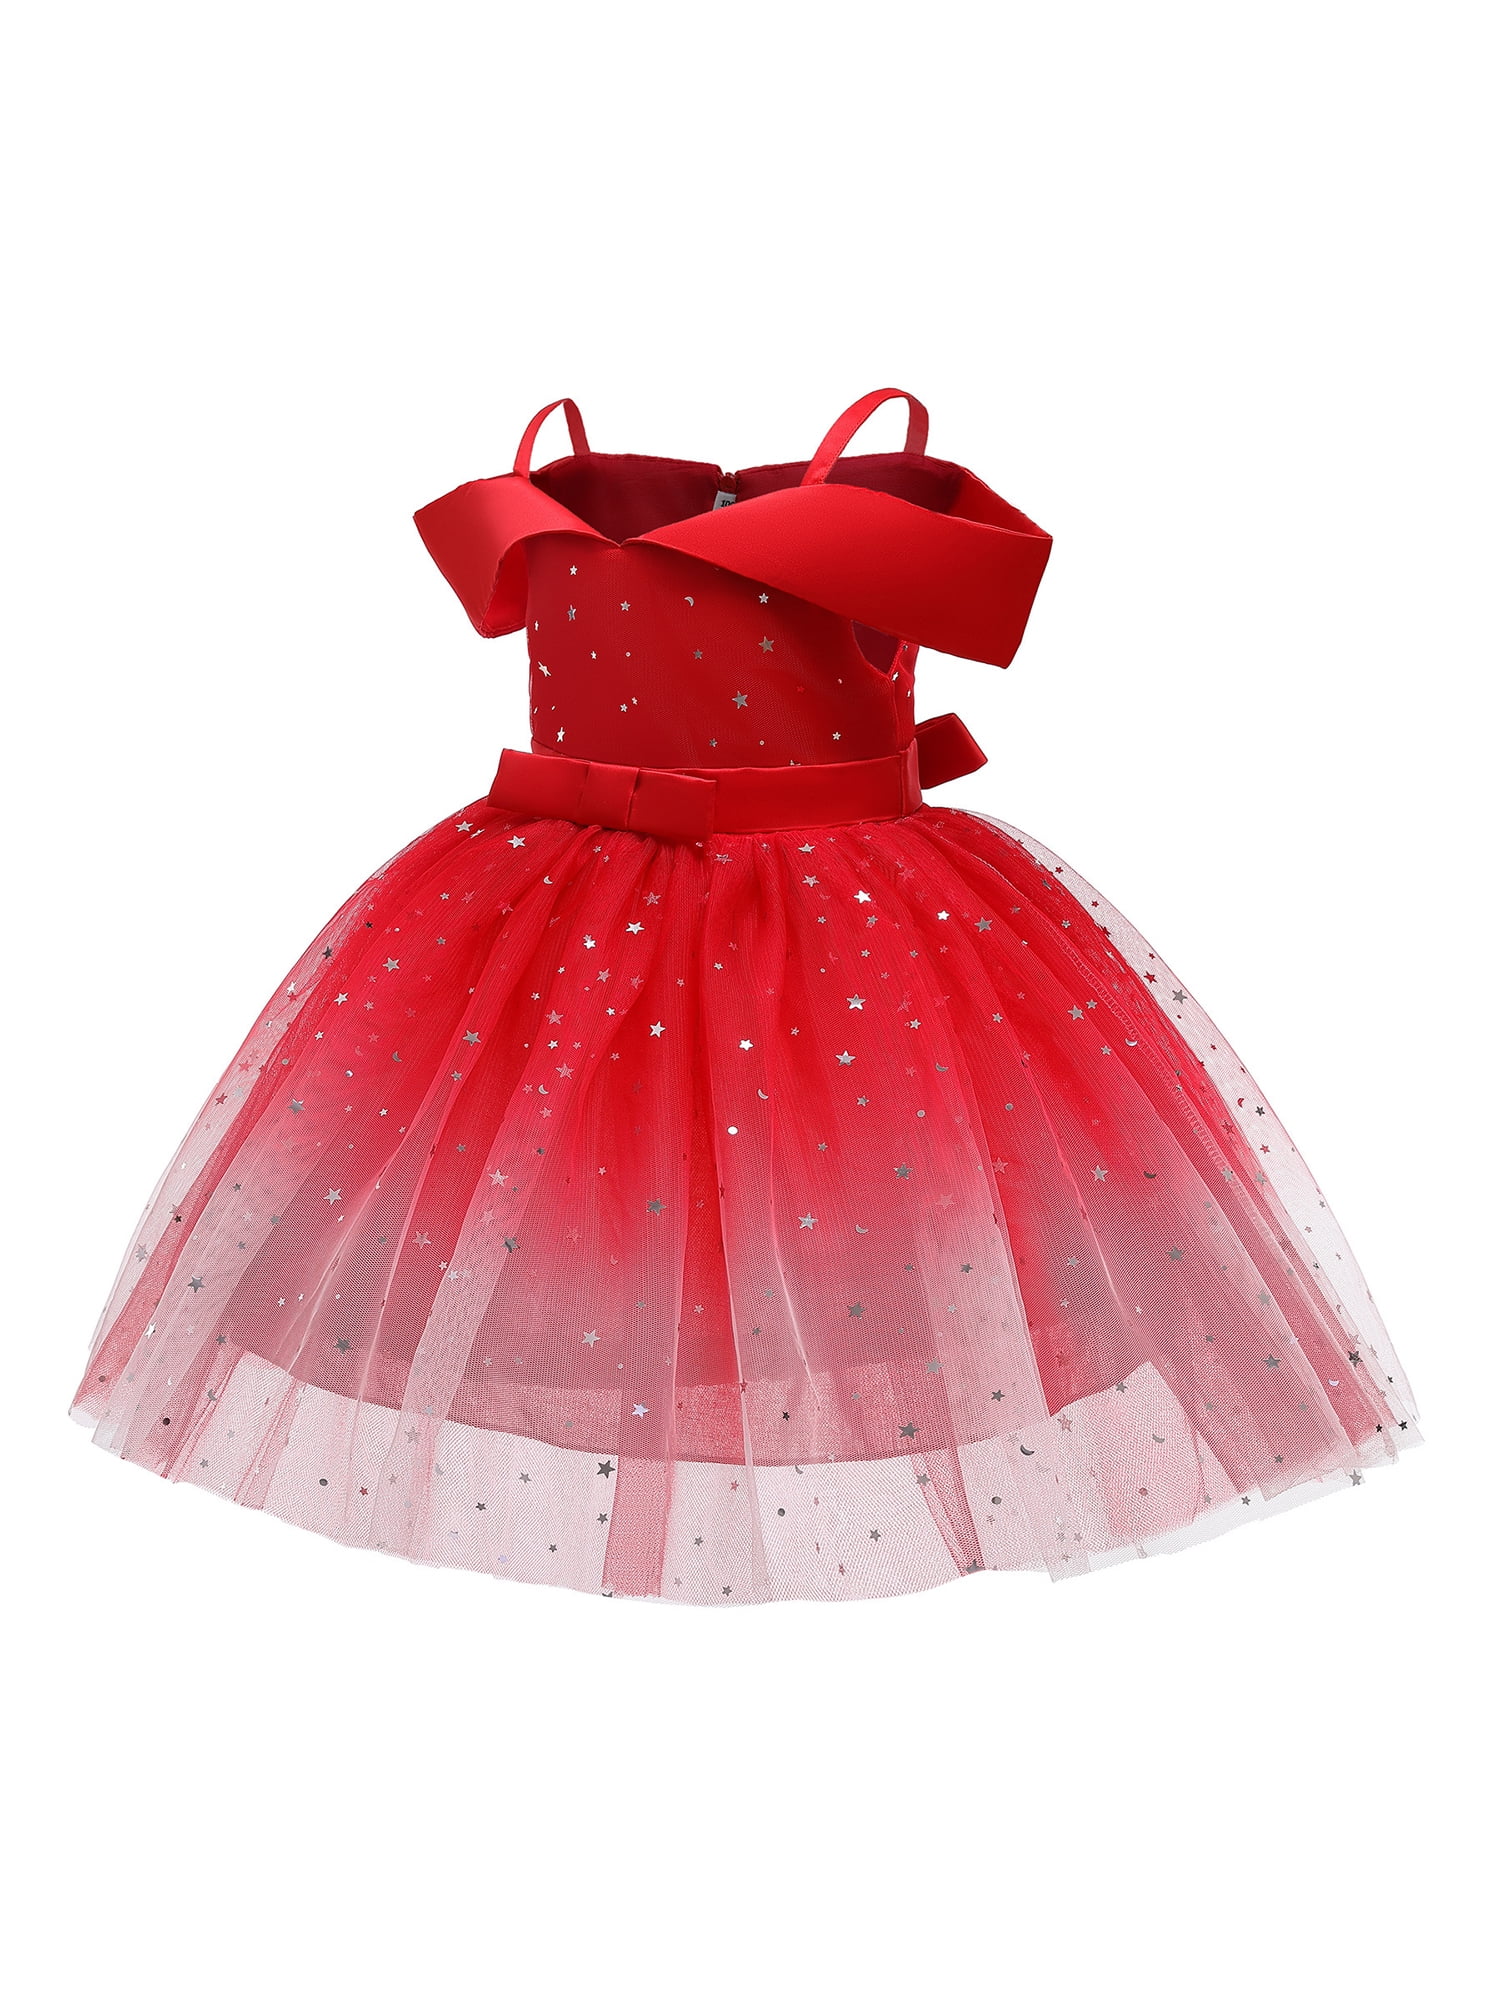 Flower Girls Princess Bow Dress Toddler Baby Wedding Party Pageant Tutu Dresses